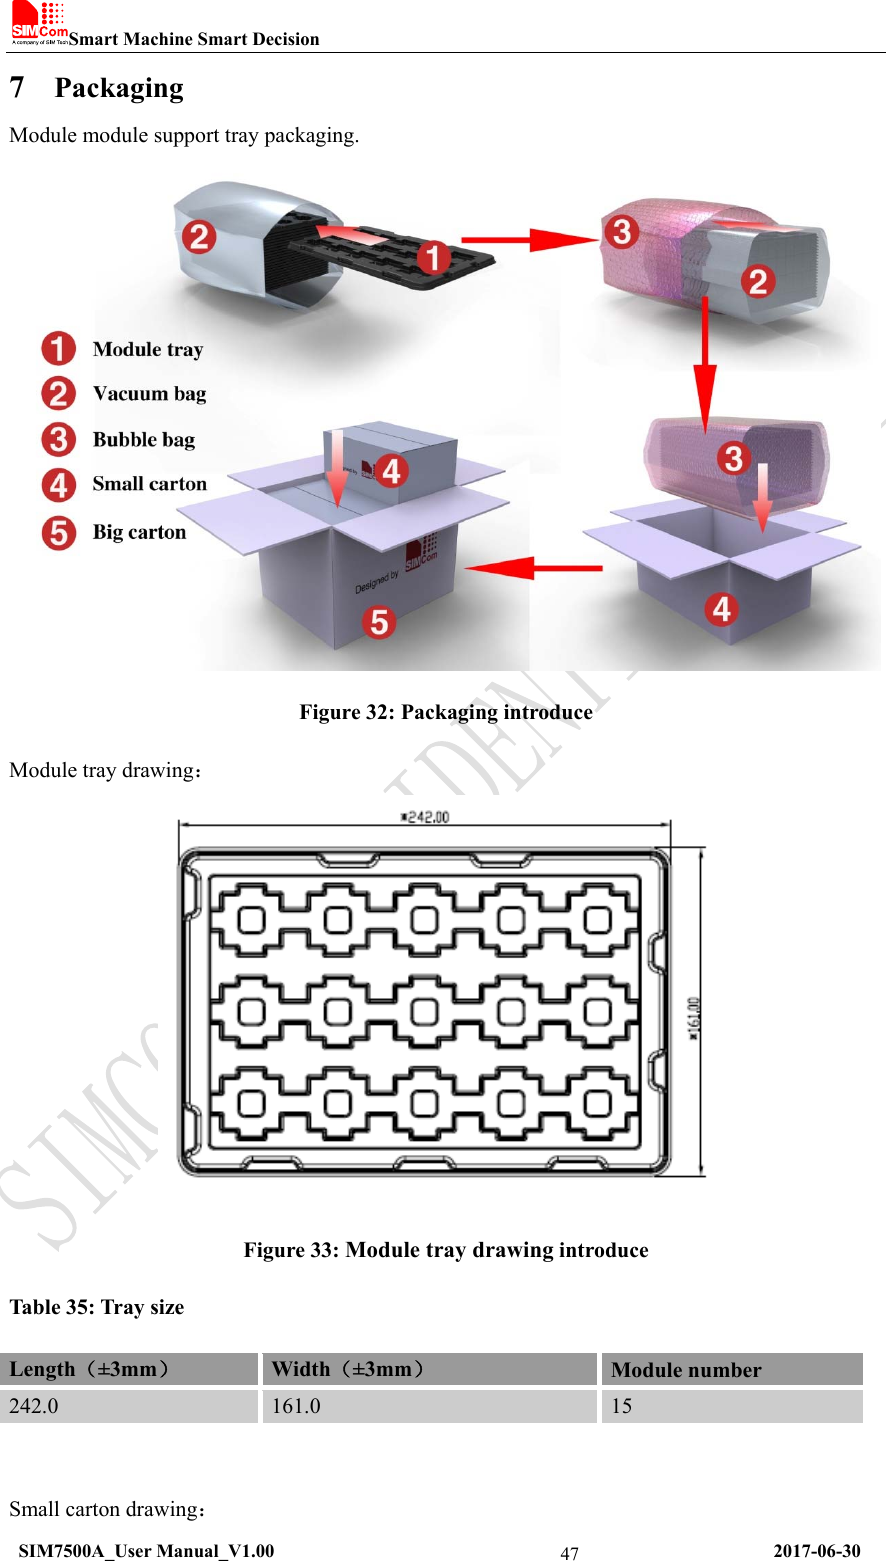 Smart Machine Smart Decision   SIM7500A_User Manual_V1.00                                                      2017-06-30 477 Packaging Module module support tray packaging.  Figure 32: Packaging introduce Module tray drawing：  Figure 33: Module tray drawing introduce Table 35: Tray size Length（±3mm） Width（±3mm） Module number 242.0  161.0  15   Small carton drawing： 